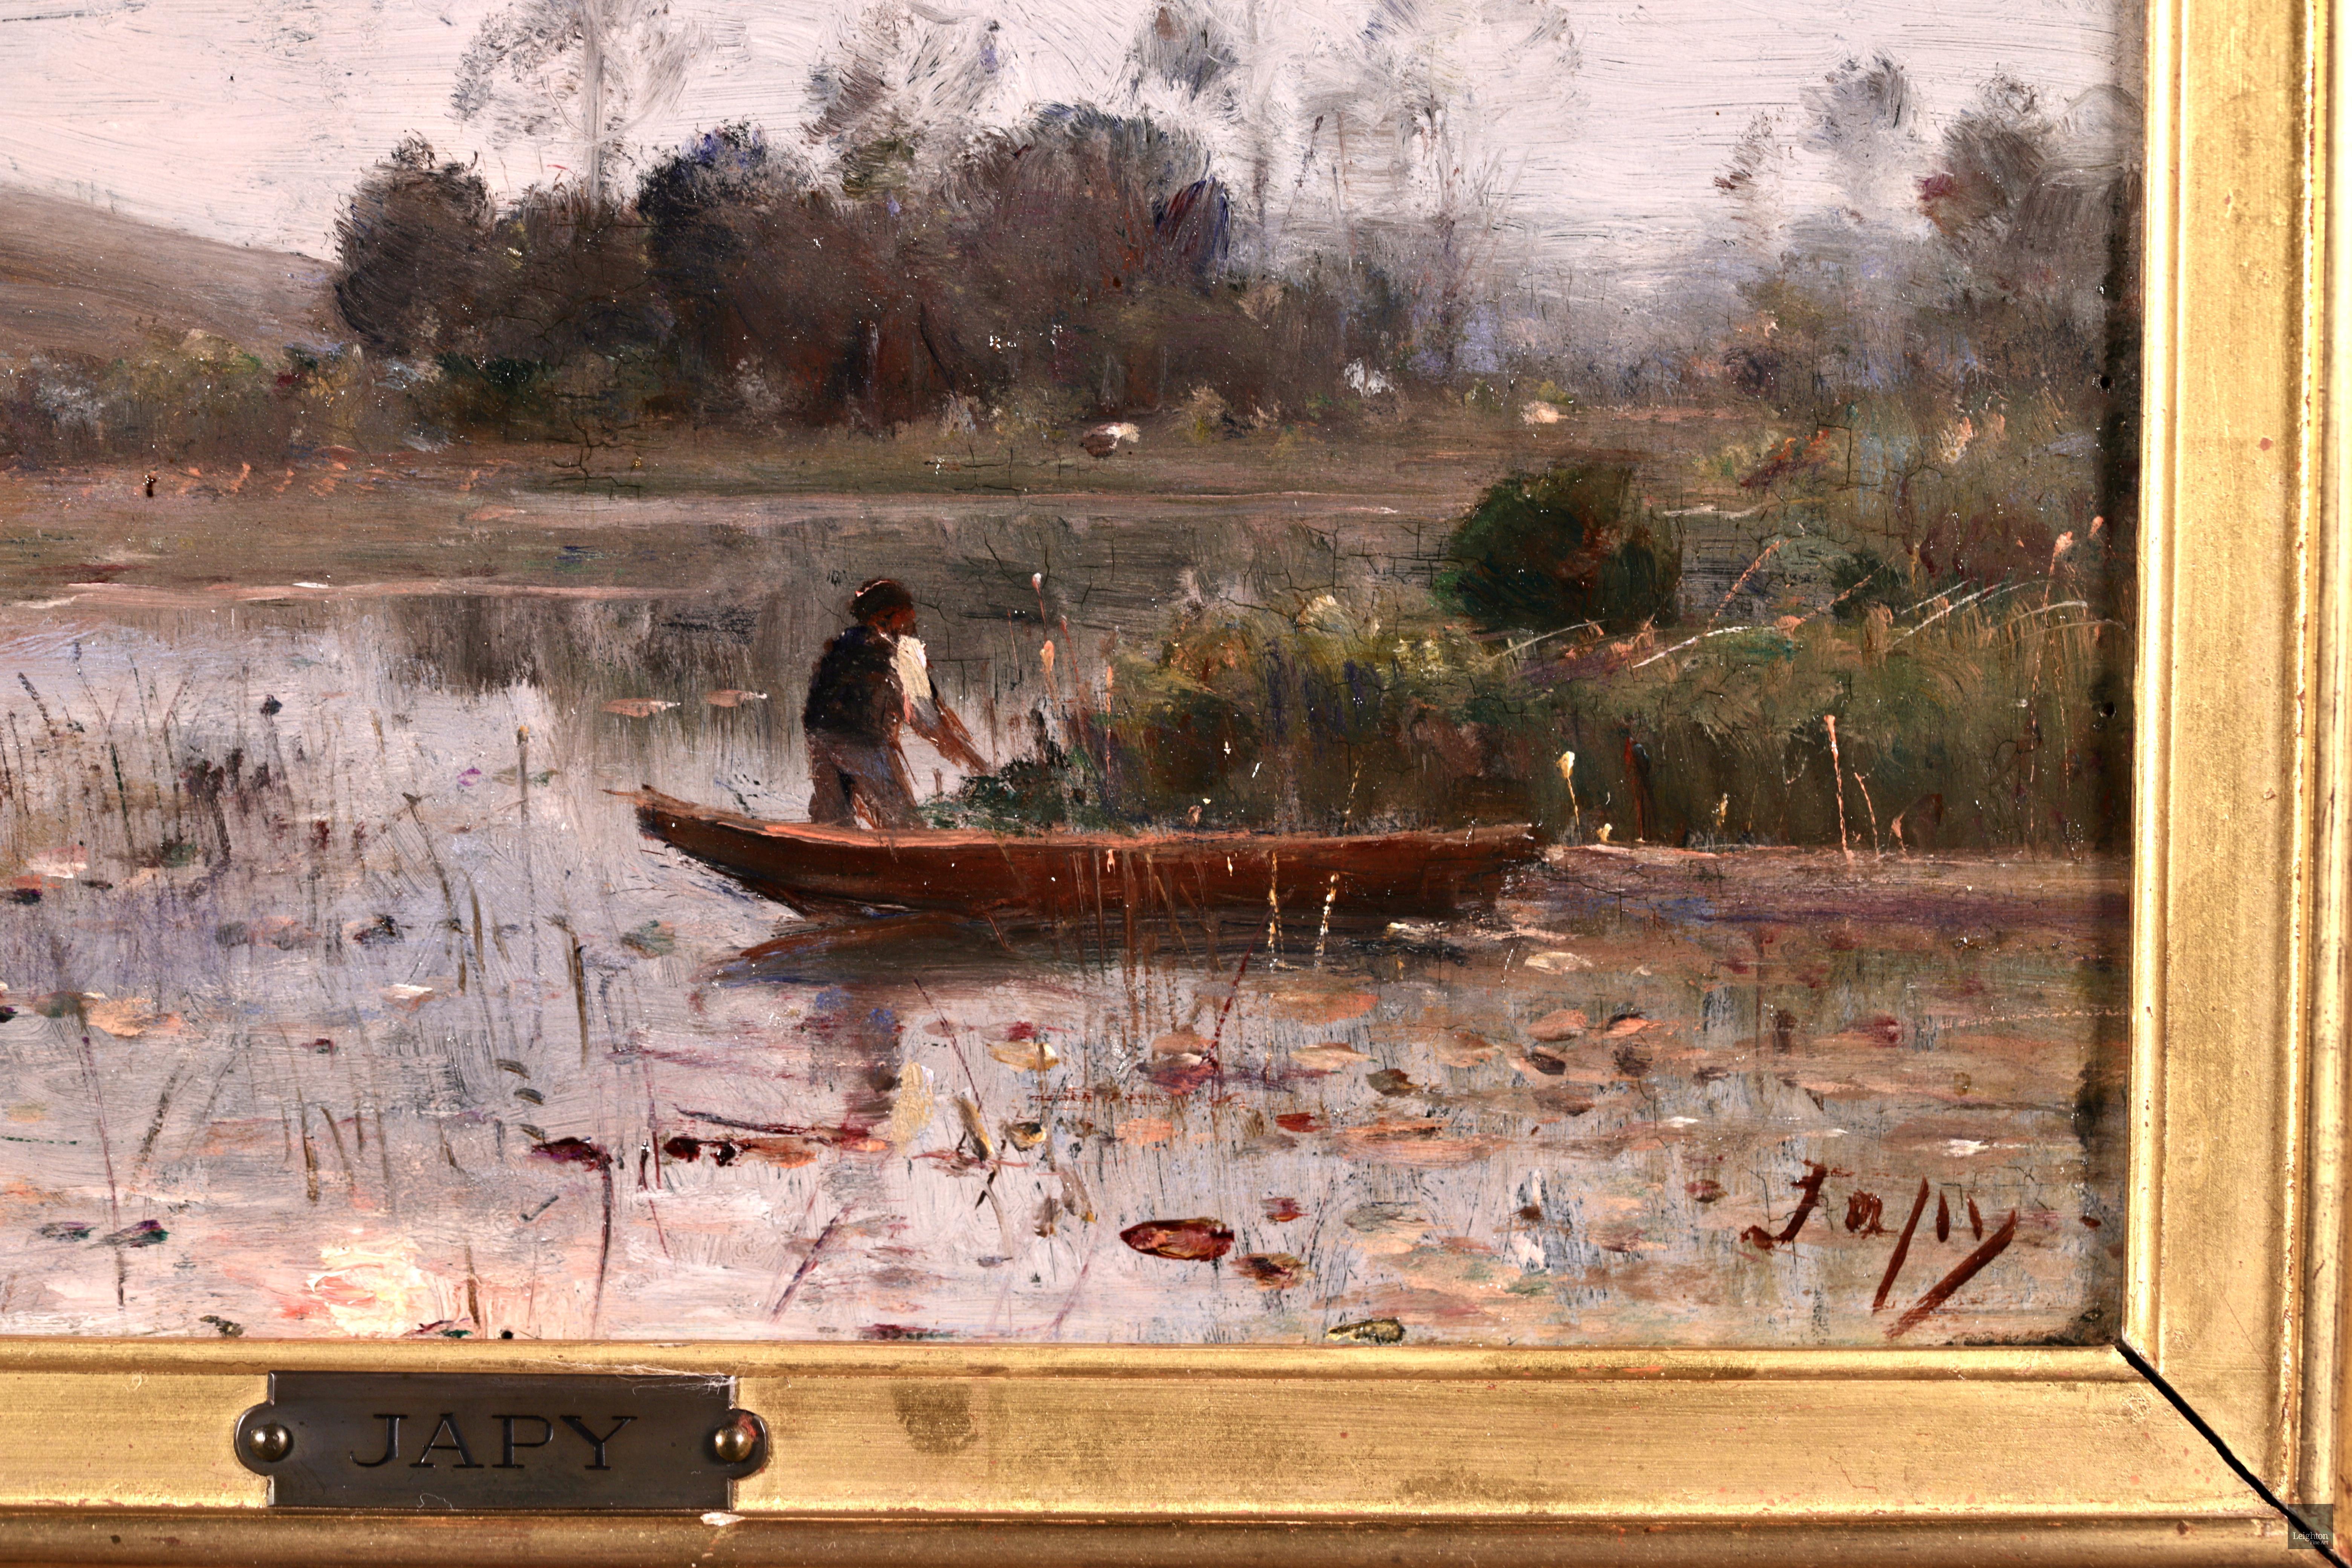 Signed Barbizon school oil on panel riverscape circa 1880 by French painter Louis Aime Japy. The piece depicts a fisherman in a small boat on the river as the sun fades and disappears behind a cloud.

Signature:
Signed lower